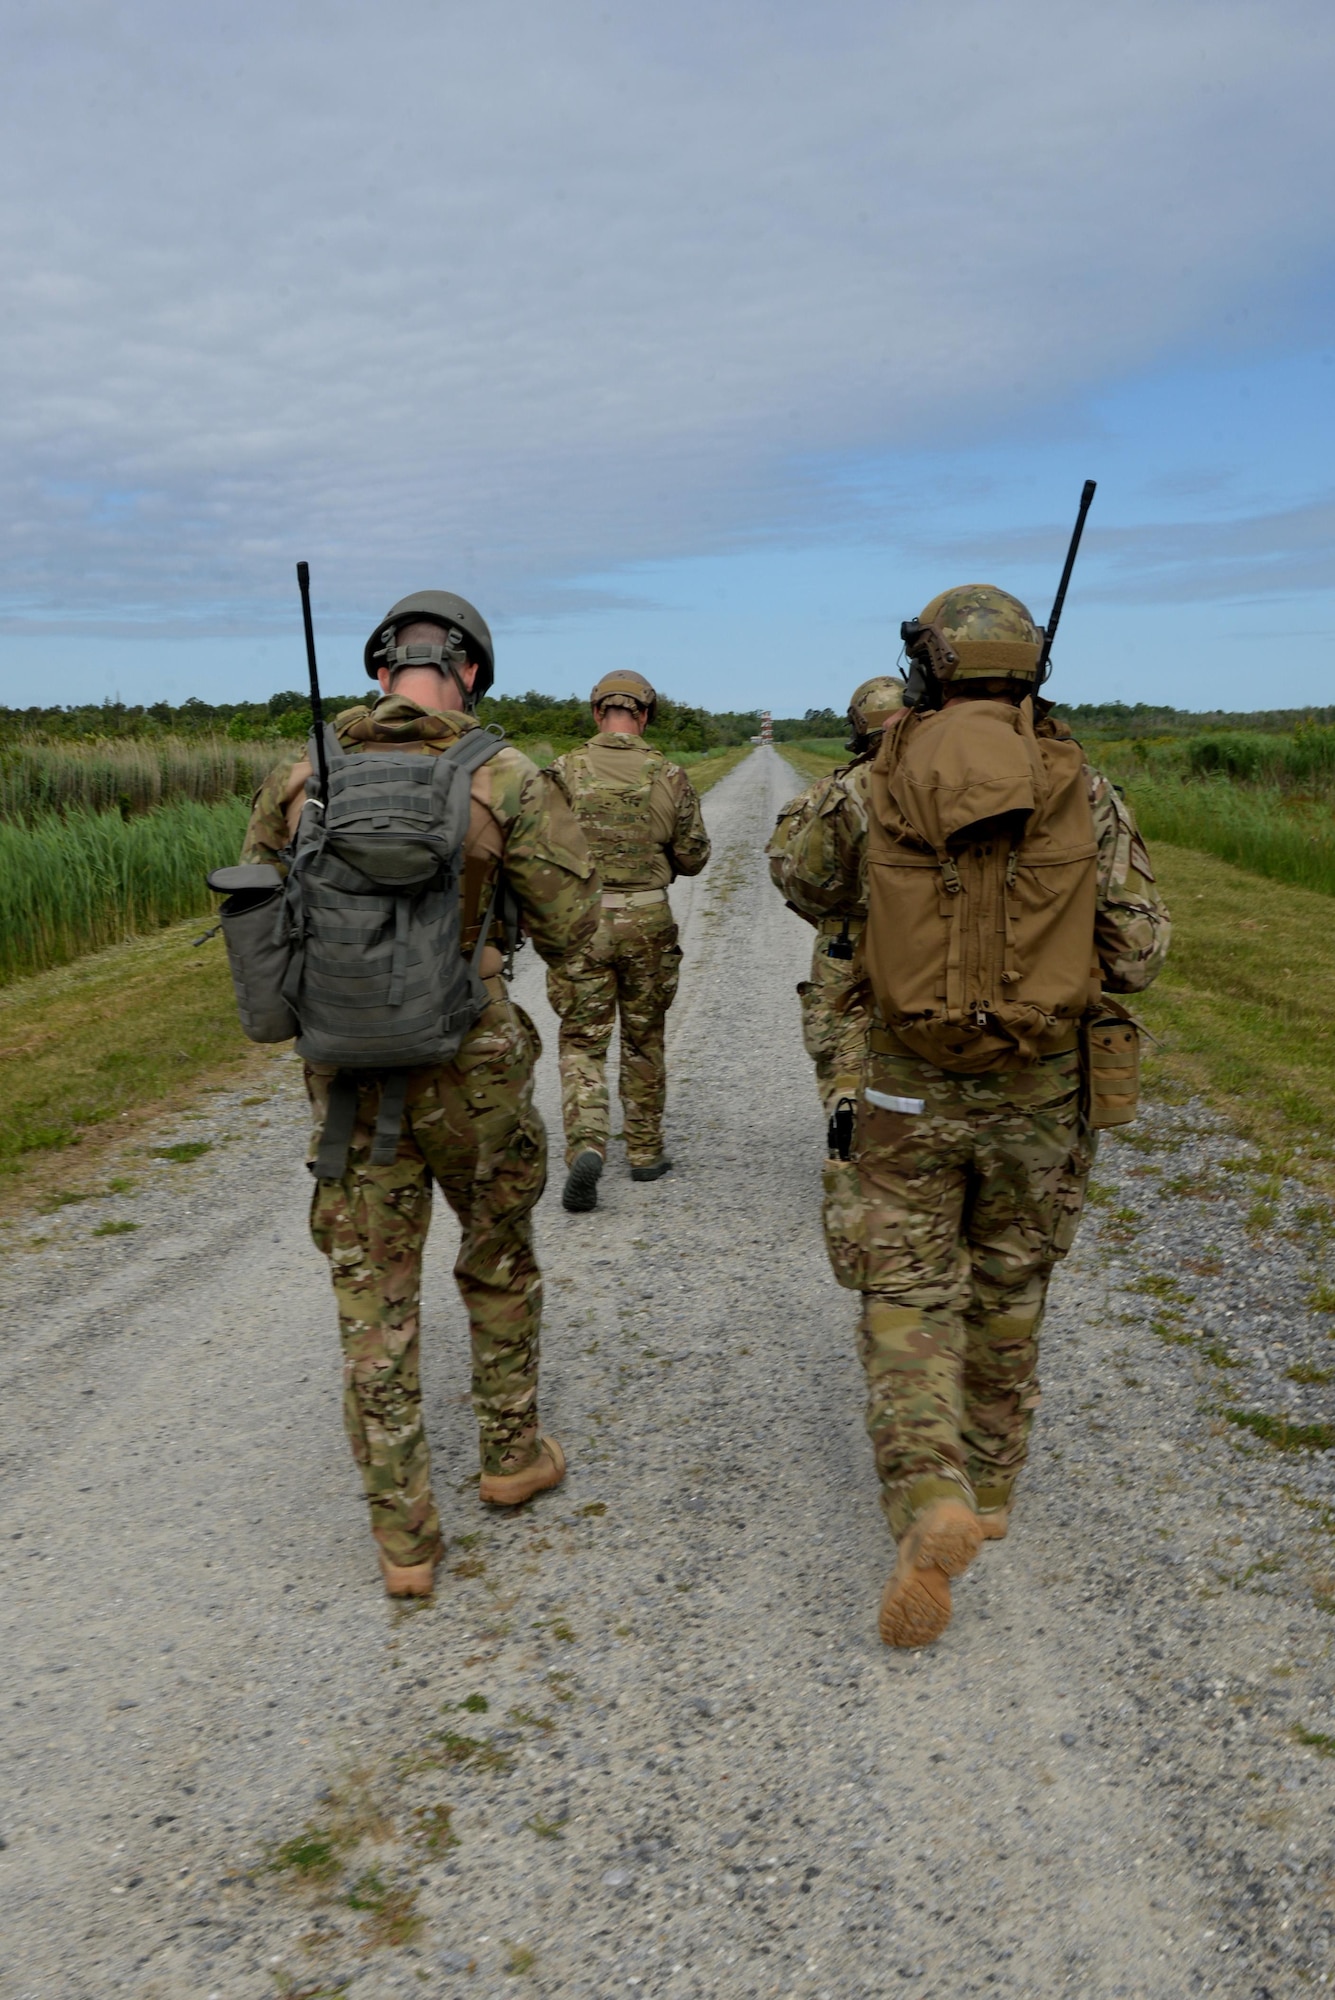 Joint terminal attack controllers, assigned to the 25th Air Support Operations Squadron, hike to a control tower during exercise Razor Talon, May 20, 2016, at Dare County Bombing Range, North Carolina. Their goal was to train in an anti-access/area denial scenario, to utilize the full combat capability of the 25th ASOS to include JTACs, joint fires observers and air support operations center personnel. (U.S. Air Force photo by Airman 1st Class Ashley Williamson/Released)